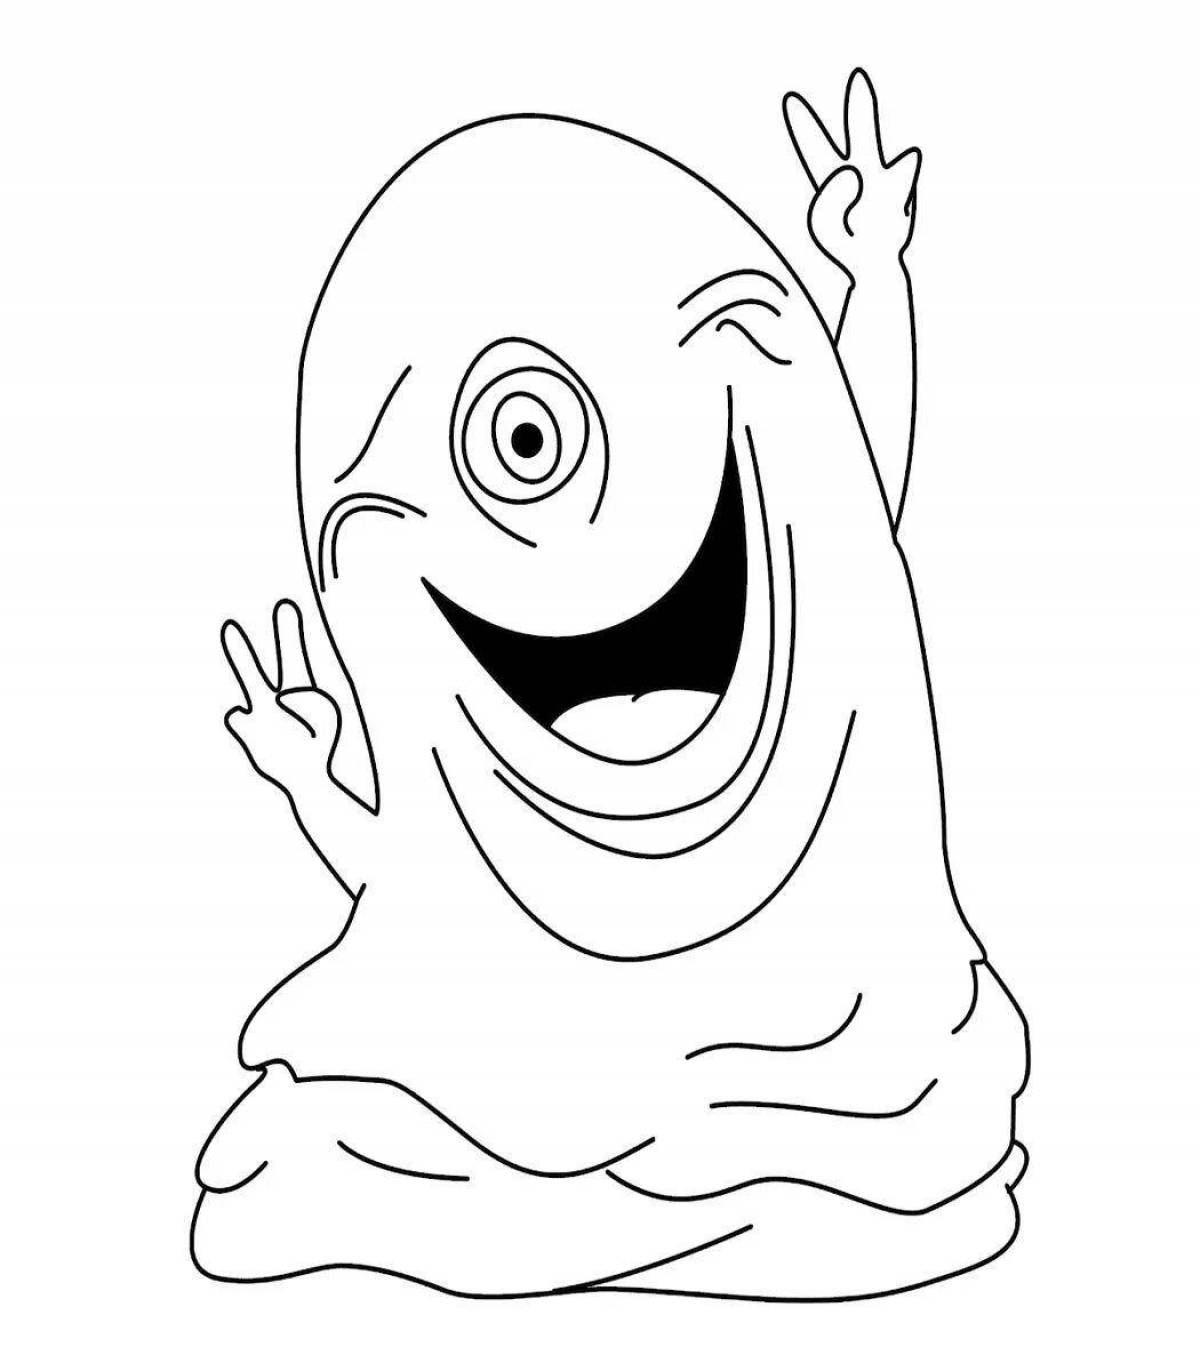 Outrageous slime coloring page